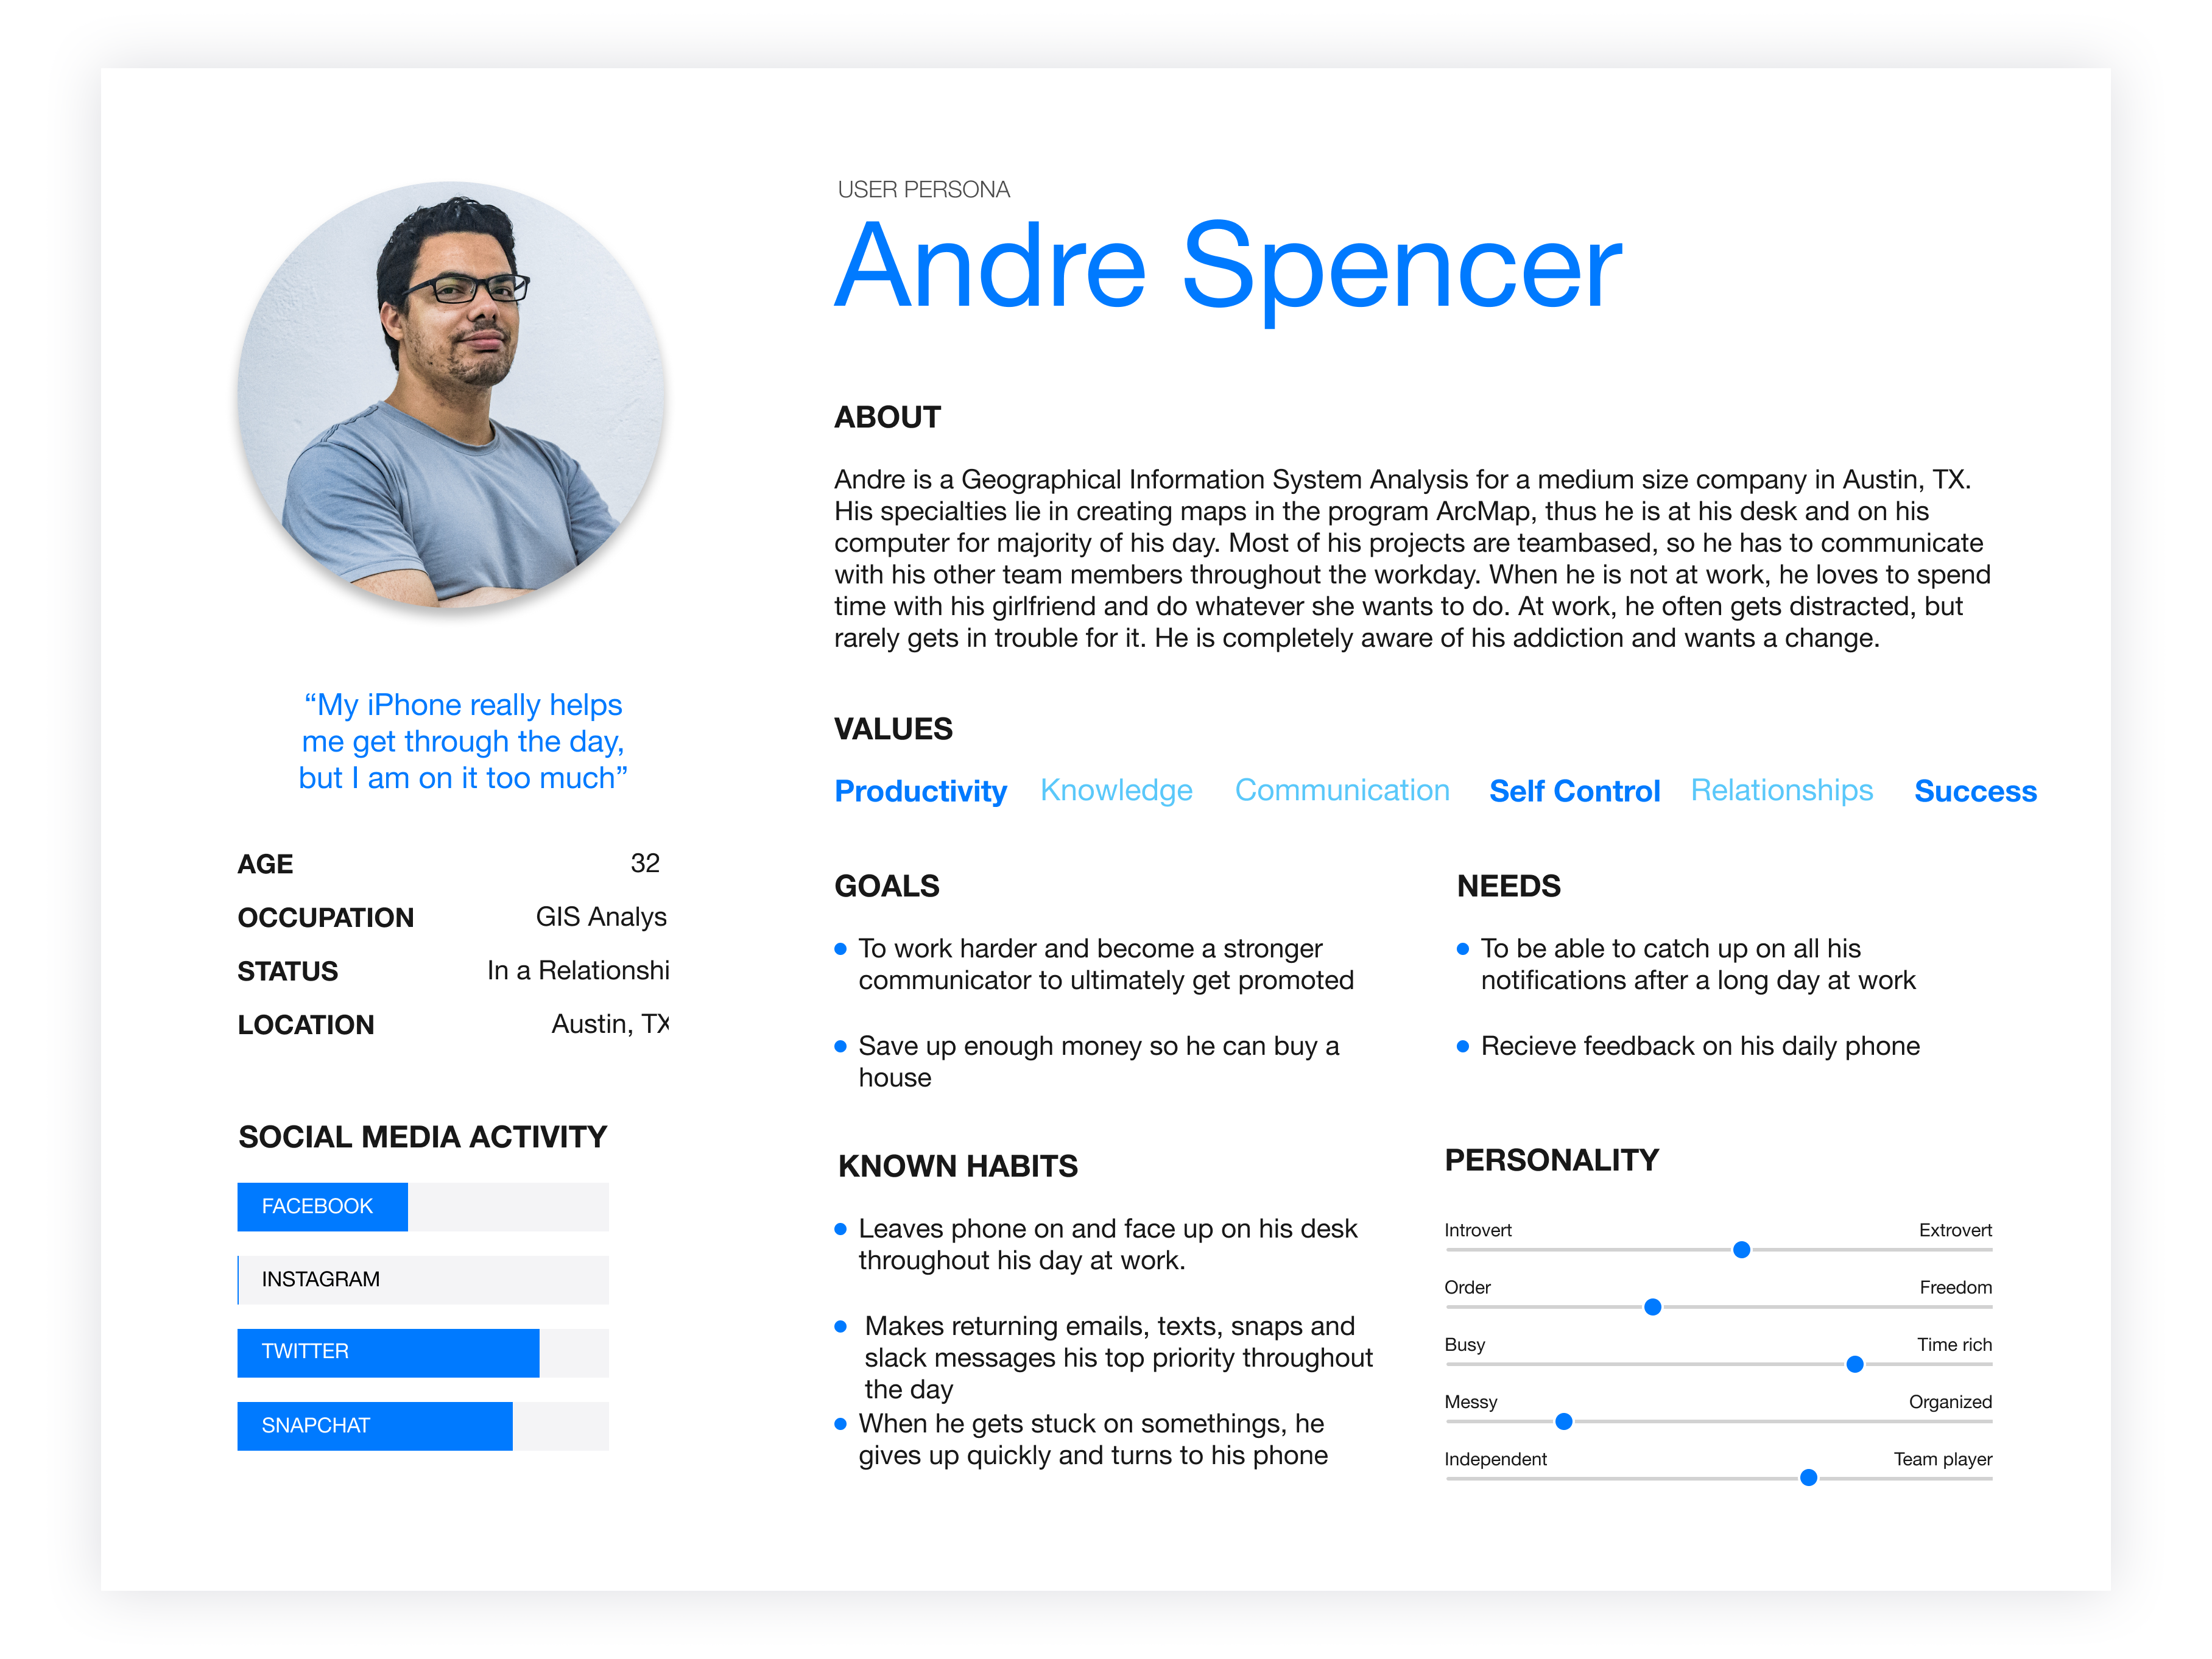 Persona for our user Andre